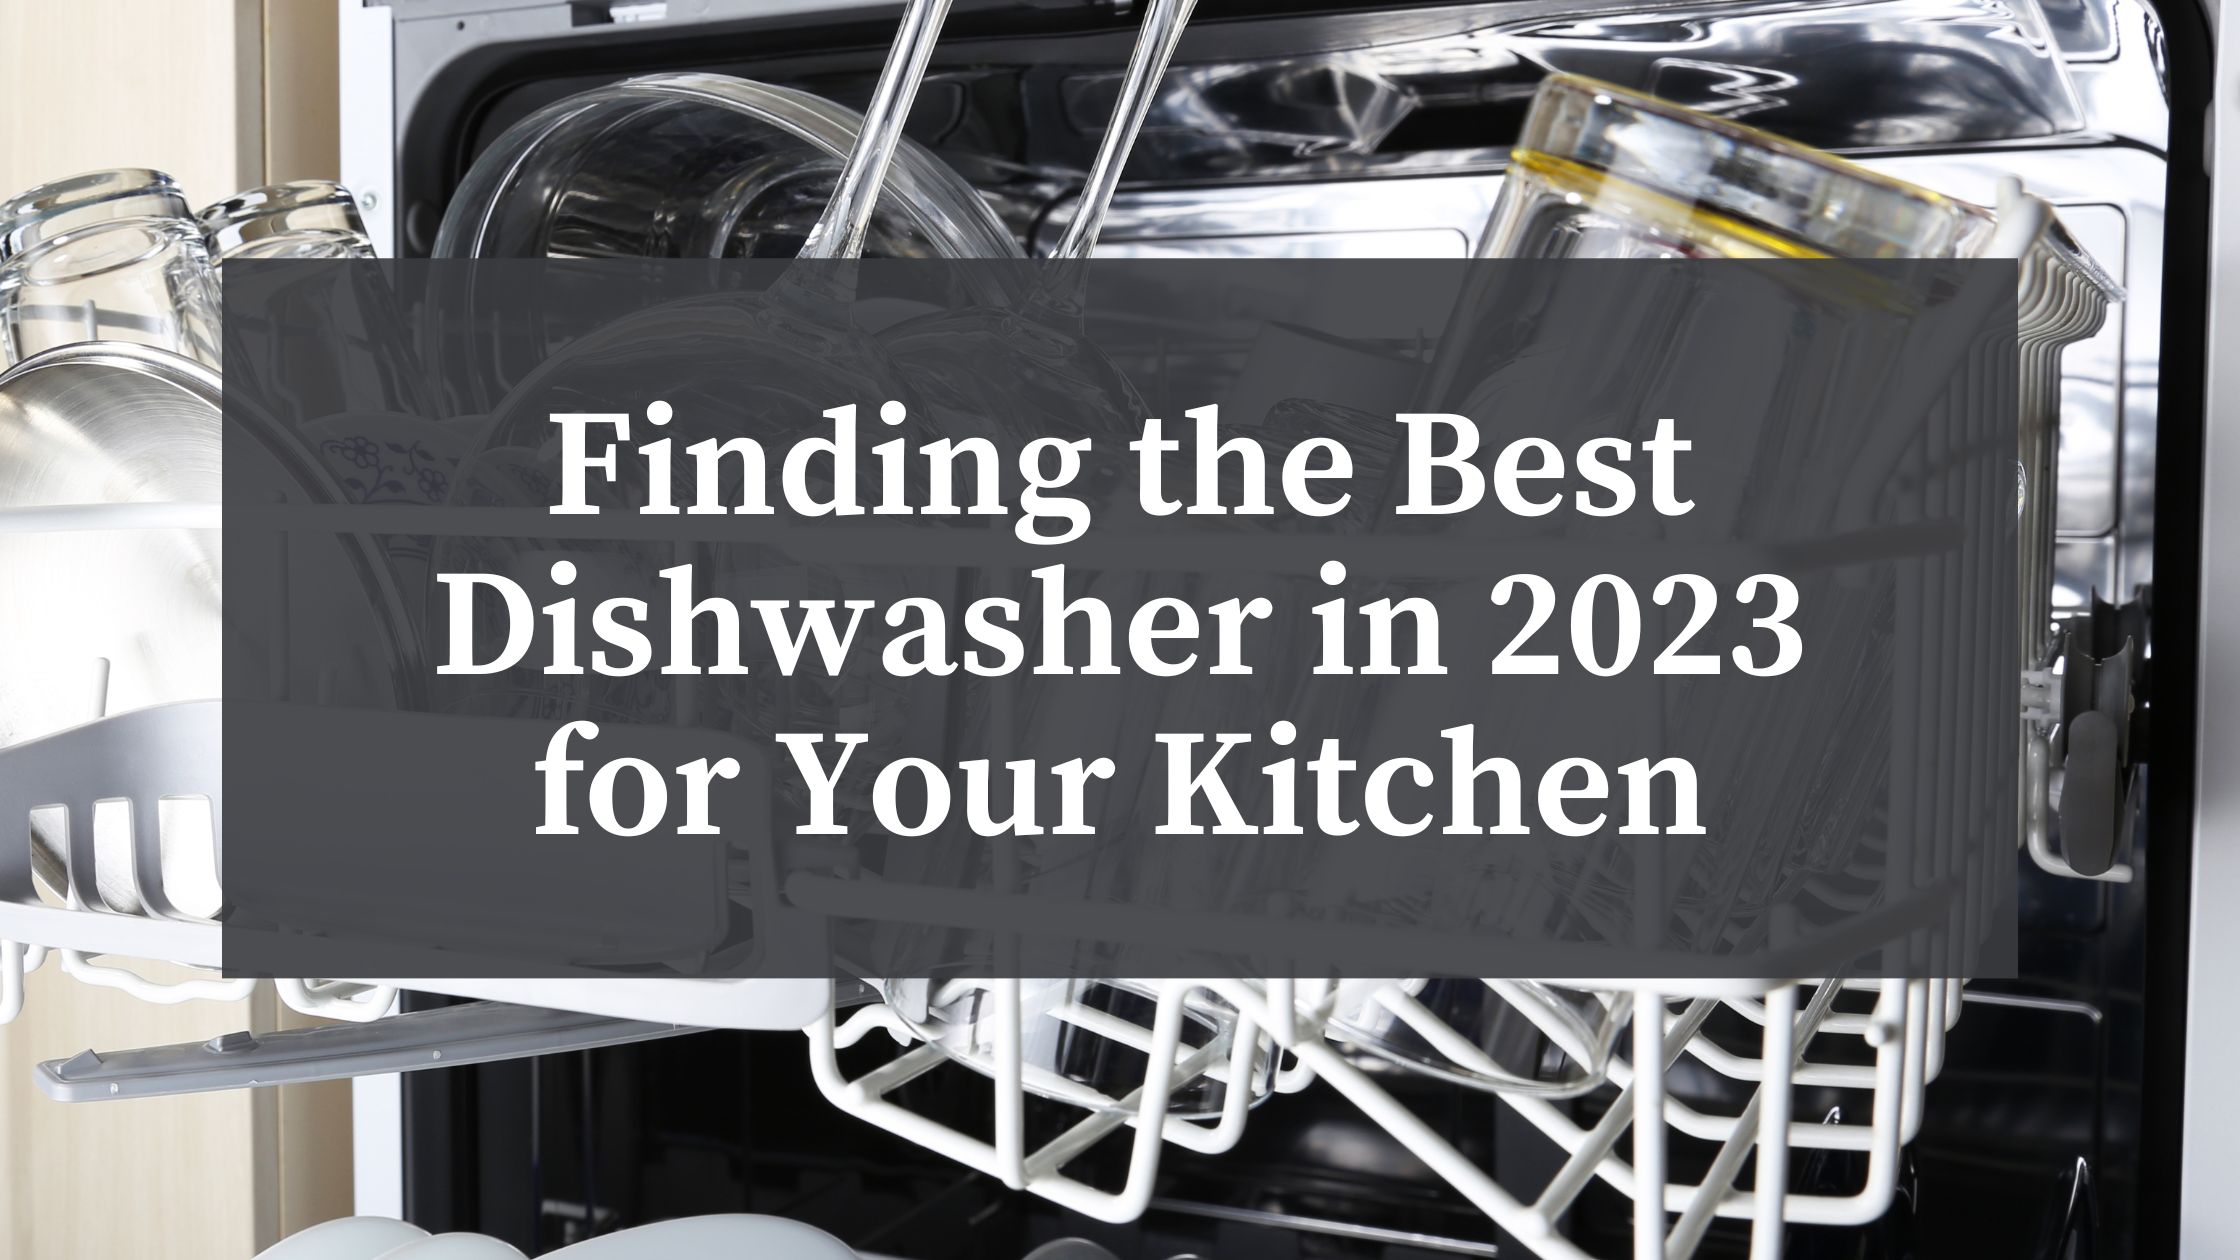 best dishwasher in 2023 for home with door open in kitchen loaded with dishes like plates glasses cups bowls